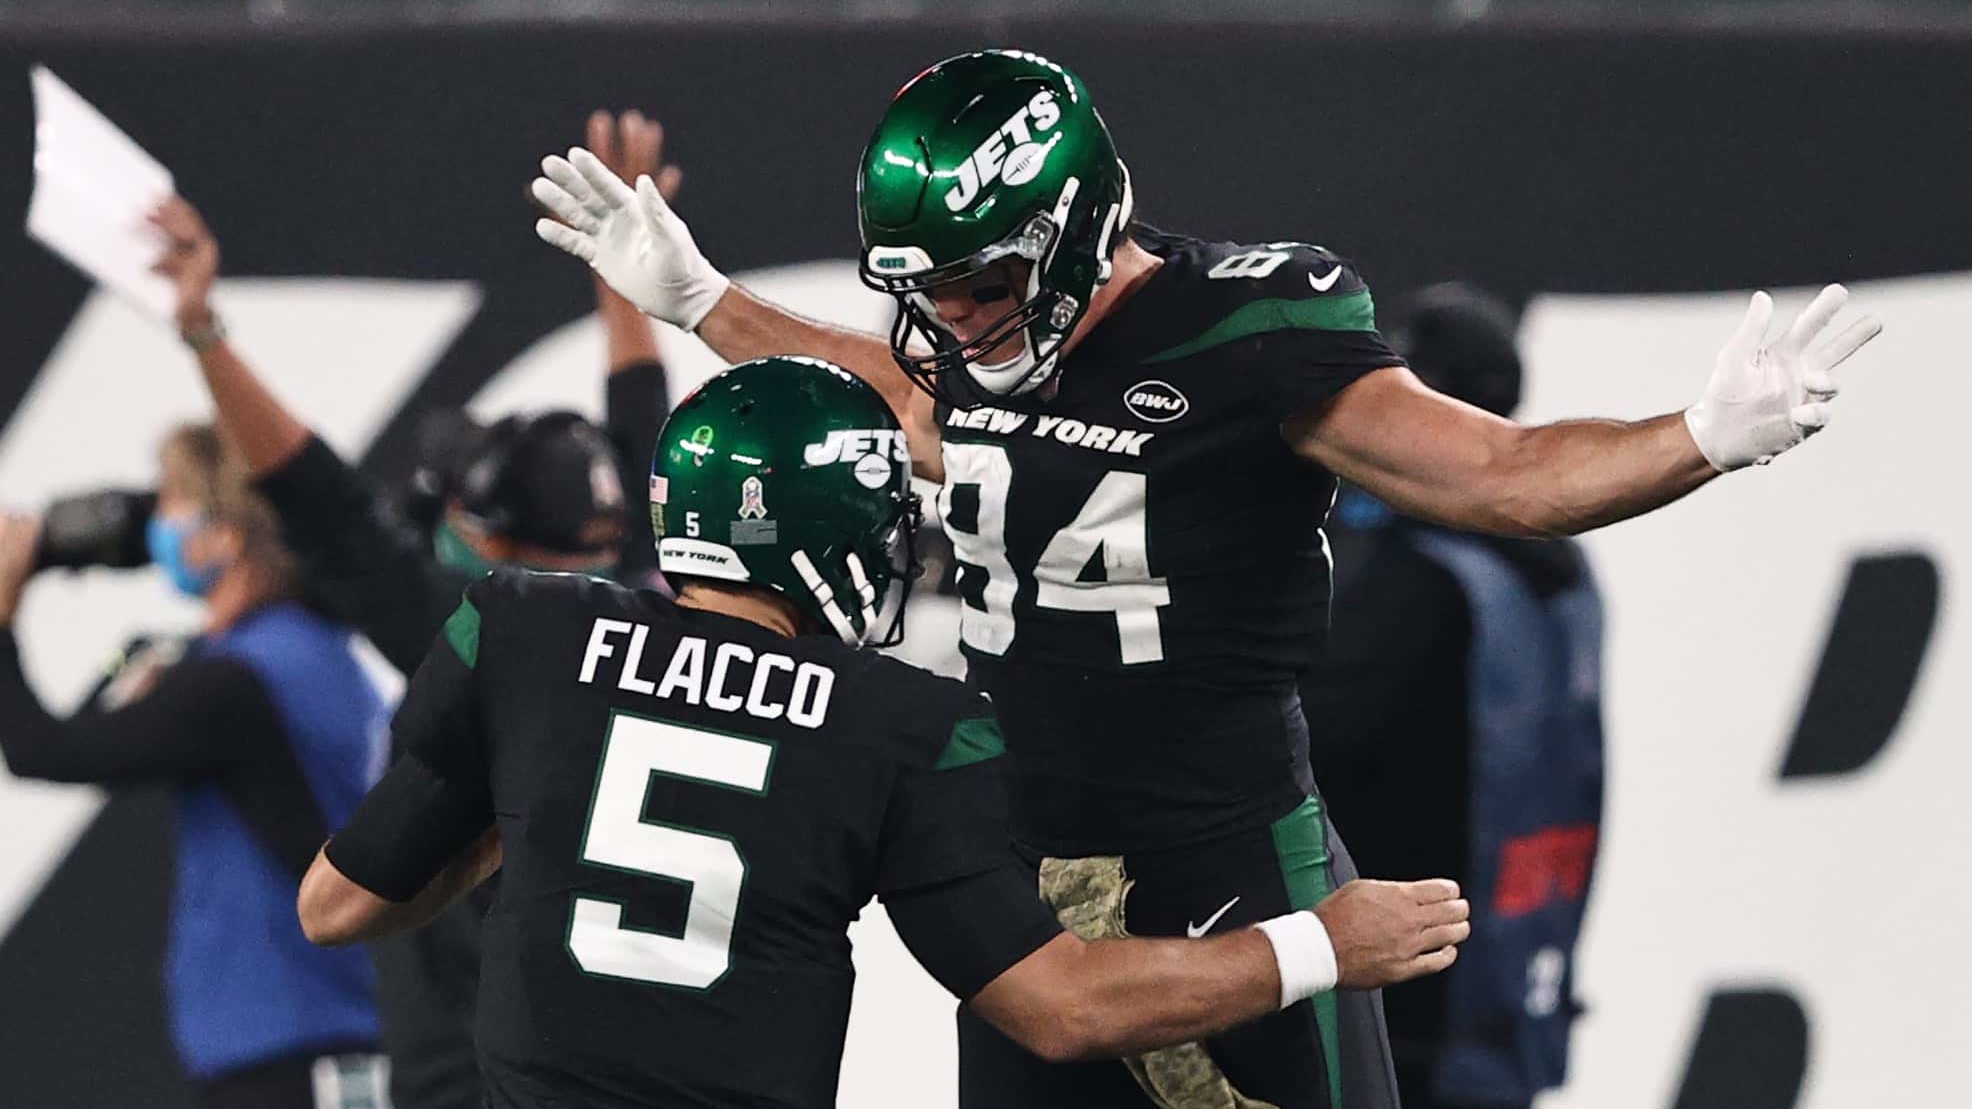 EAST RUTHERFORD, NEW JERSEY - NOVEMBER 09: Ryan Griffin #84 celebrates with Joe Flacco #5 of the New York Jets after Flacco threw a touchdown pass during the first half against the New England Patriots at MetLife Stadium on November 09, 2020 in East Rutherford, New Jersey.